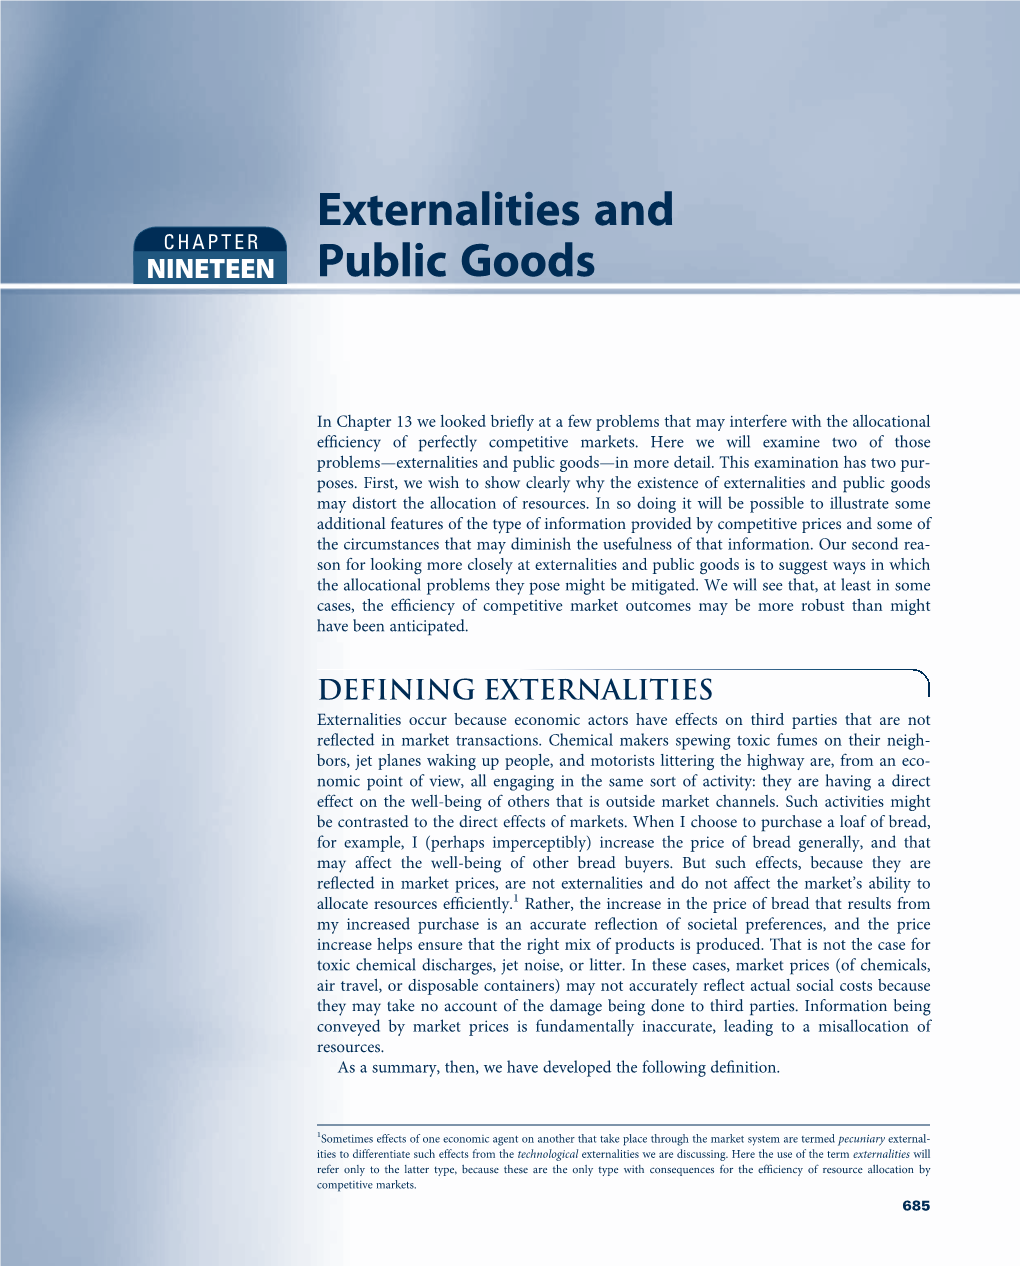 Externalities and Public Goods—In More Detail